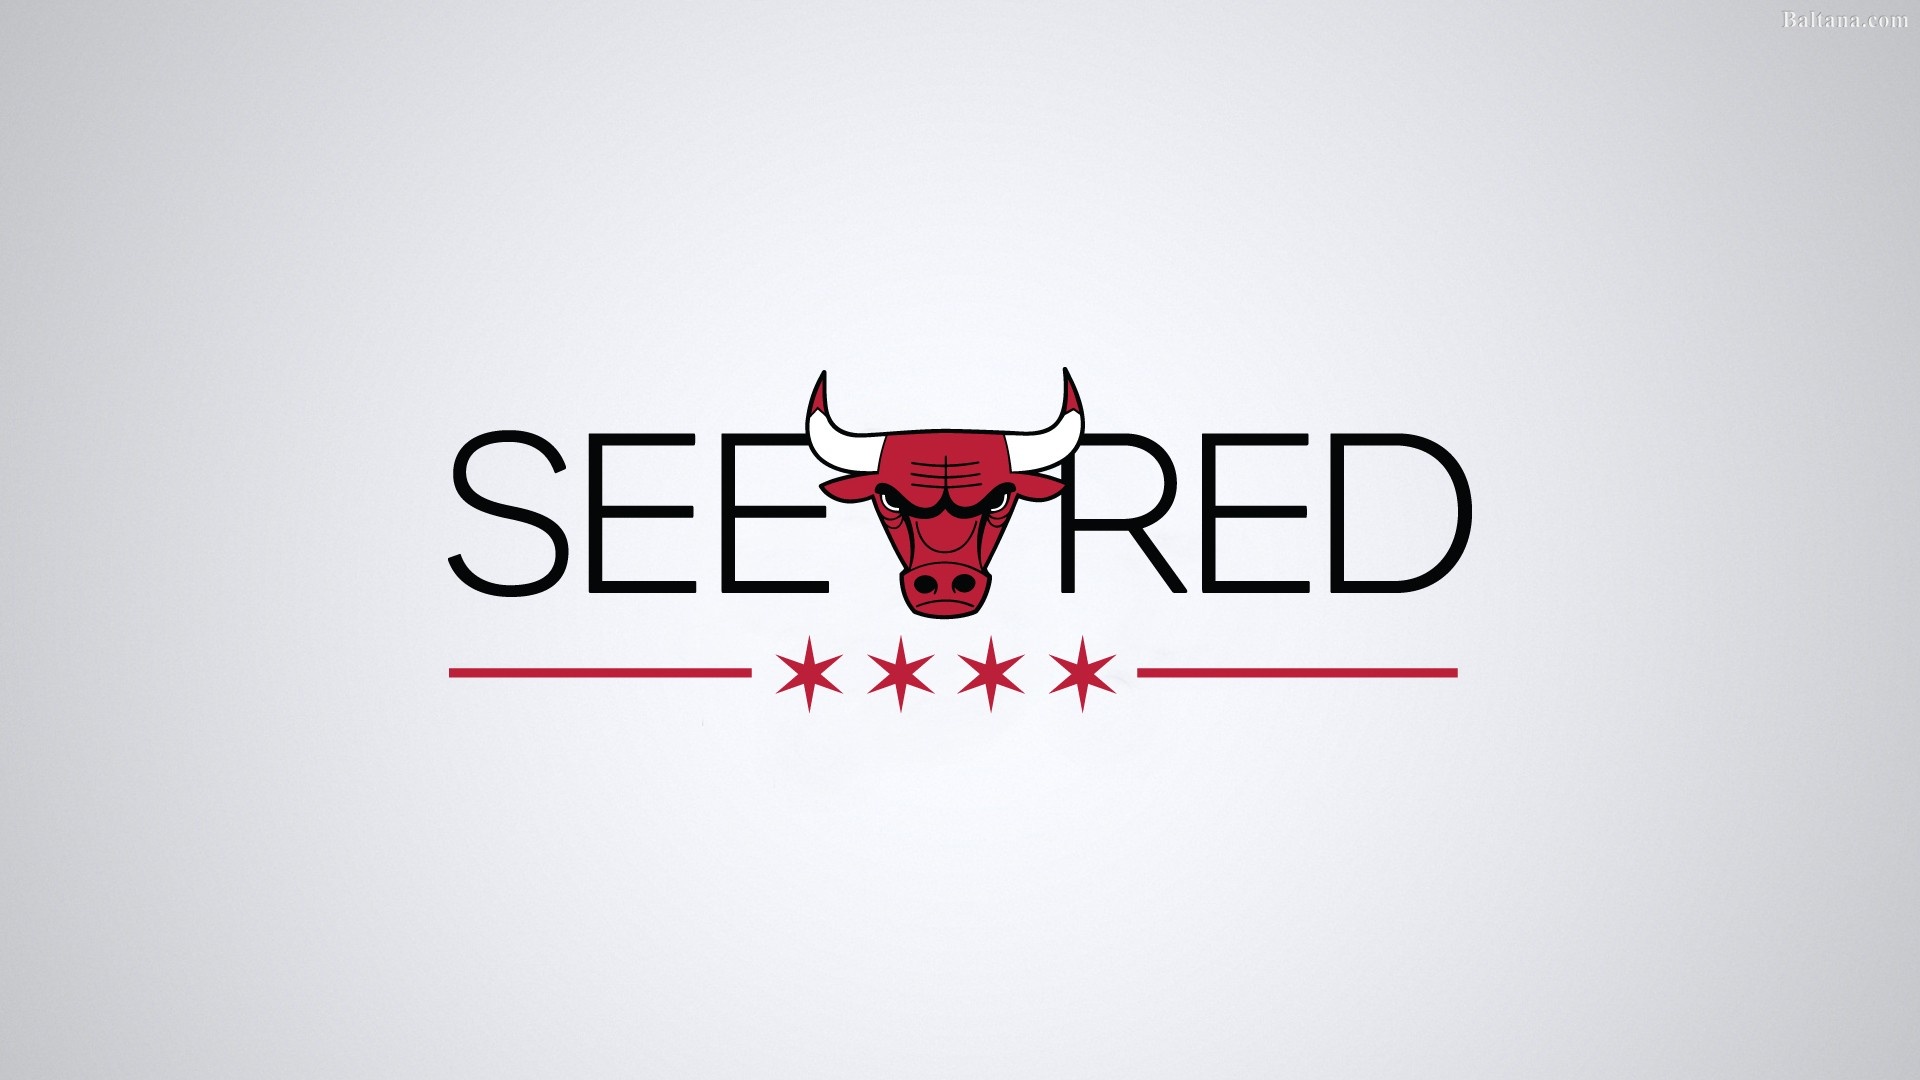 Chicago Bulls: The team won their second straight NBA title in 1992, See Red. 1920x1080 Full HD Background.